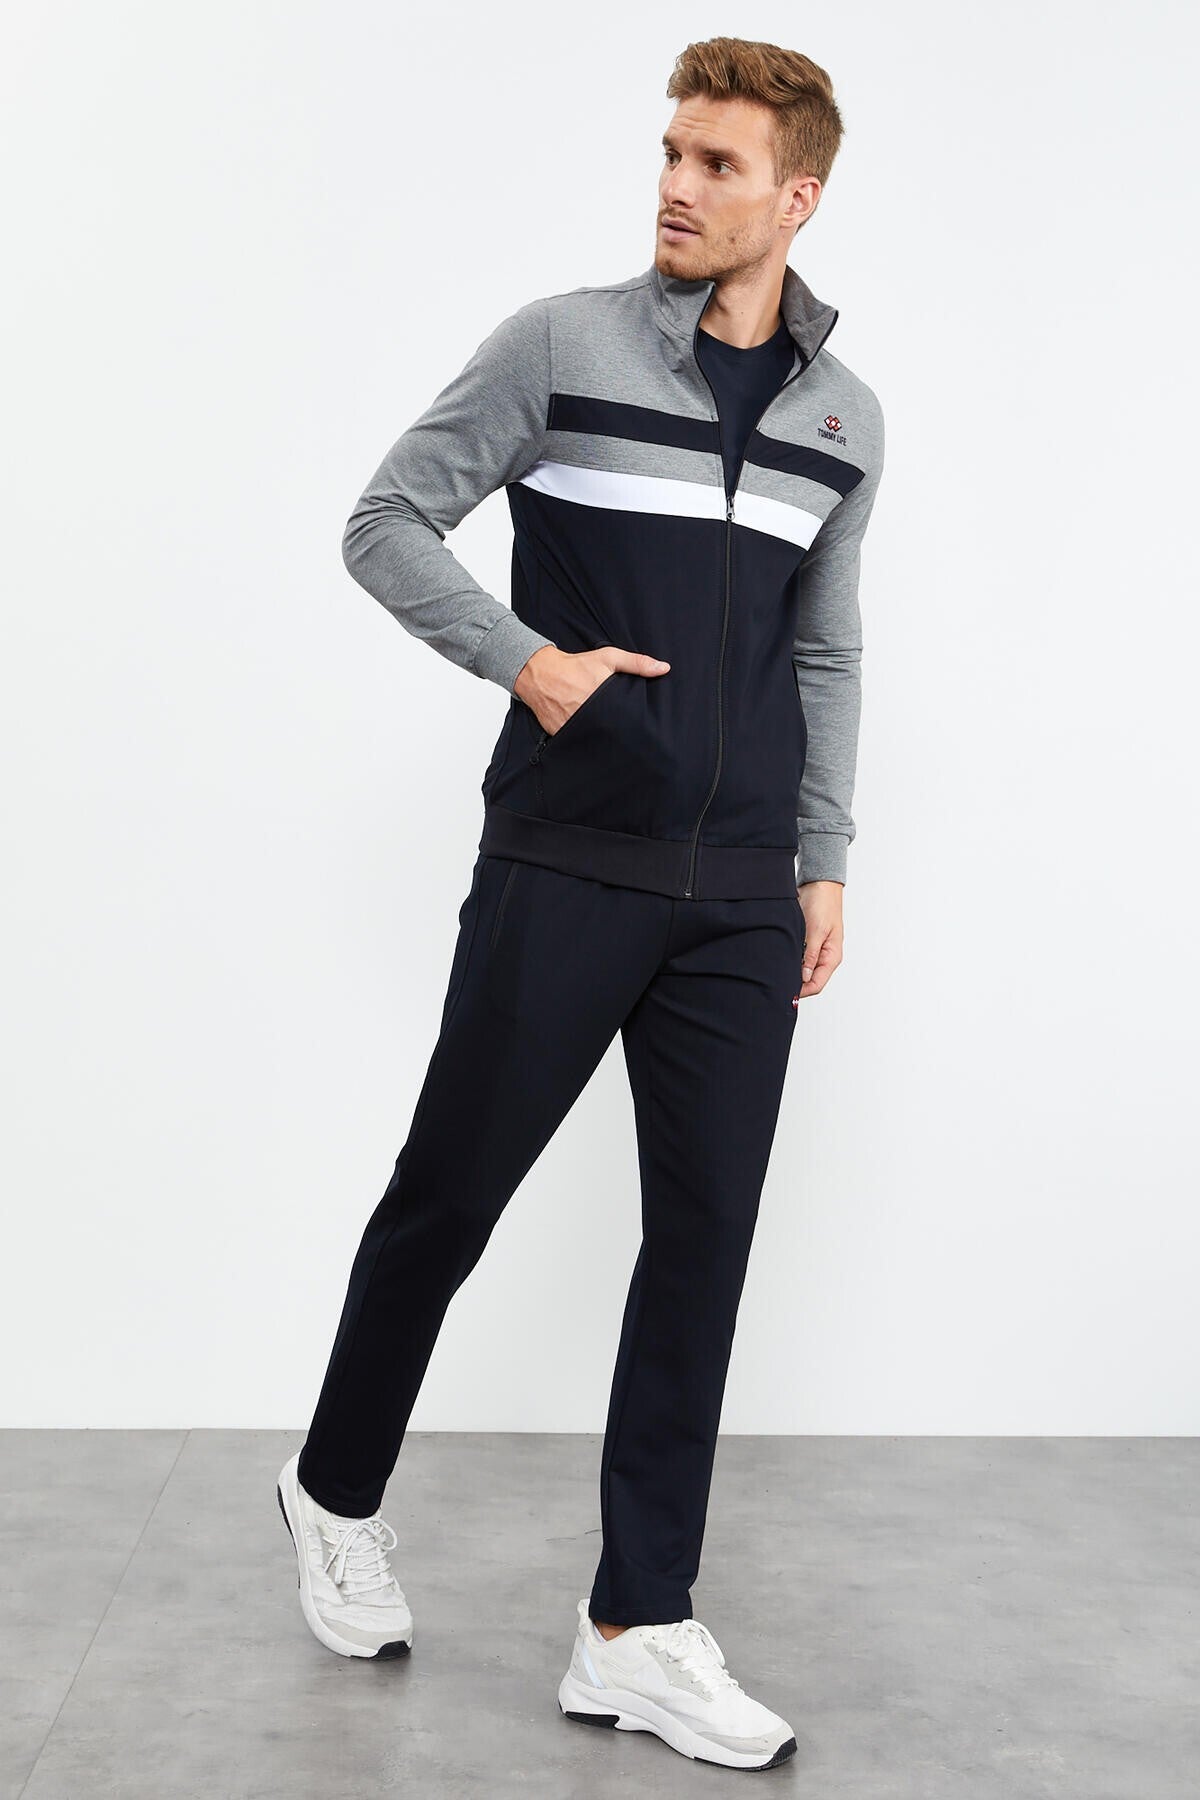 Navy Blue - Gray Stand Up Collar Zippered Casual Form Classic Leg Men's Tracksuit Set - 85118